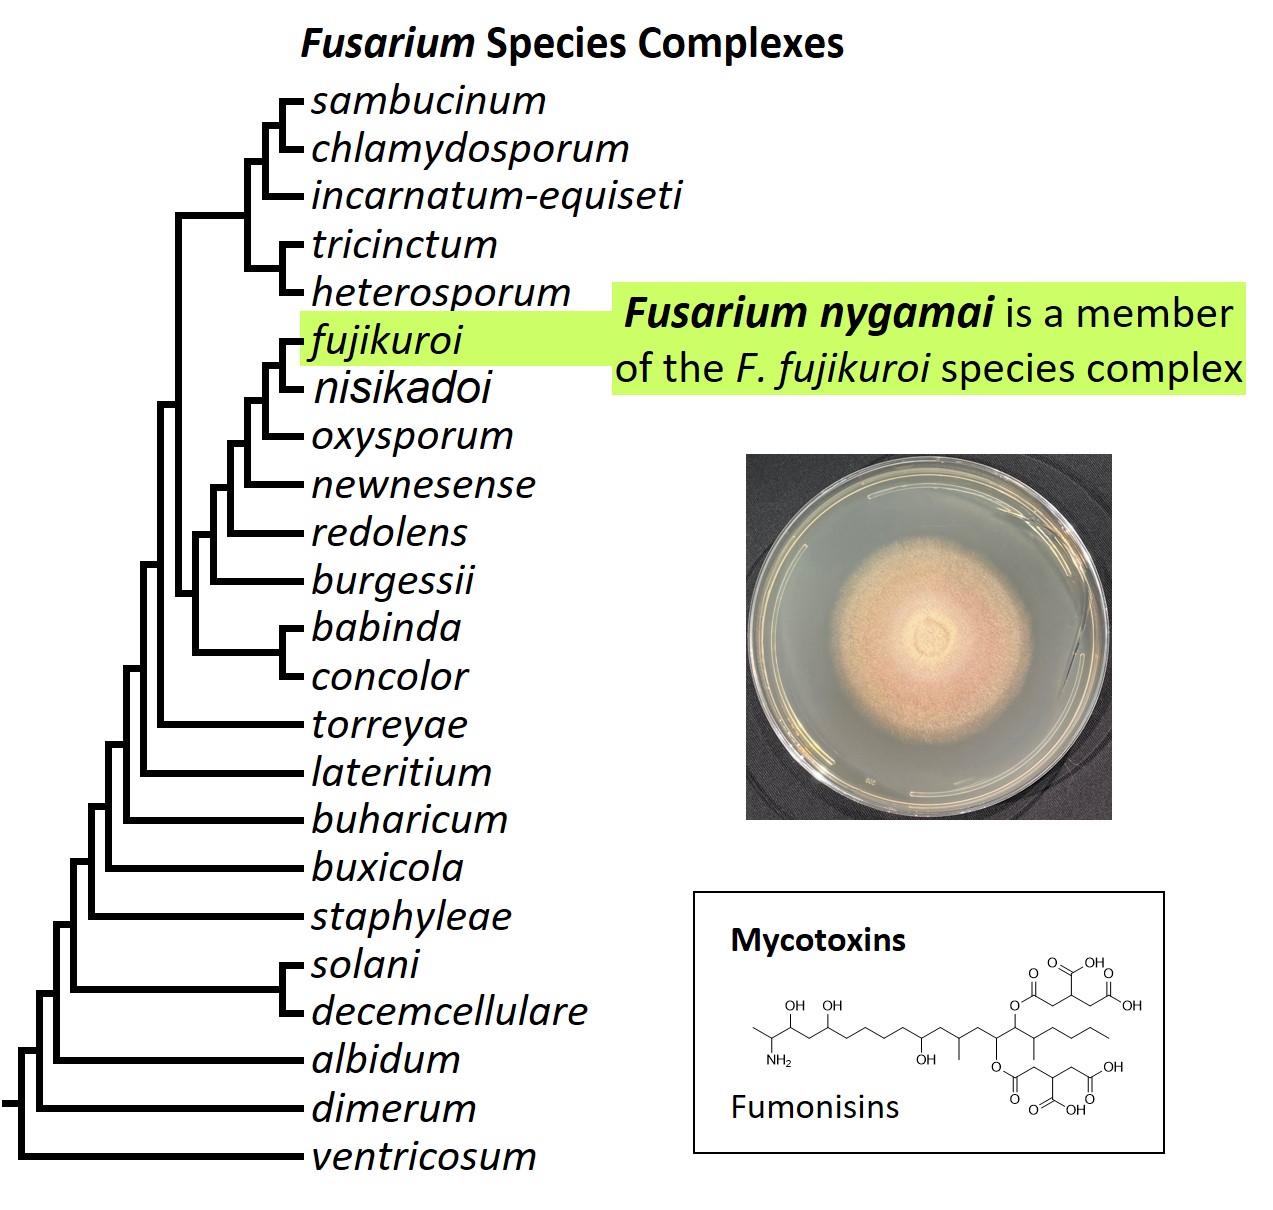 Left &ndash; tree showing phylogenetic relationships of the 23
Fusarium species complexes and placement of F. nygamai within the
F. fujikuroi species complex. In the tree, species complex names
are abbreviated using specific epithets of the species after which
the complexes are named (e.g., the F. sambucinum species complex is
abbreviated as sambucinum). Middle right &ndash; culture of F.
nygamai NRRL 66327 growing on potato dextrose agar medium. Lower
right &ndash; chemical structure of fumonisin B1, the most
economically important mycotoxin produced by F. nygamai. Image
credit: Robert H. Proctor, Amy McGovern and Crystal Probyn.